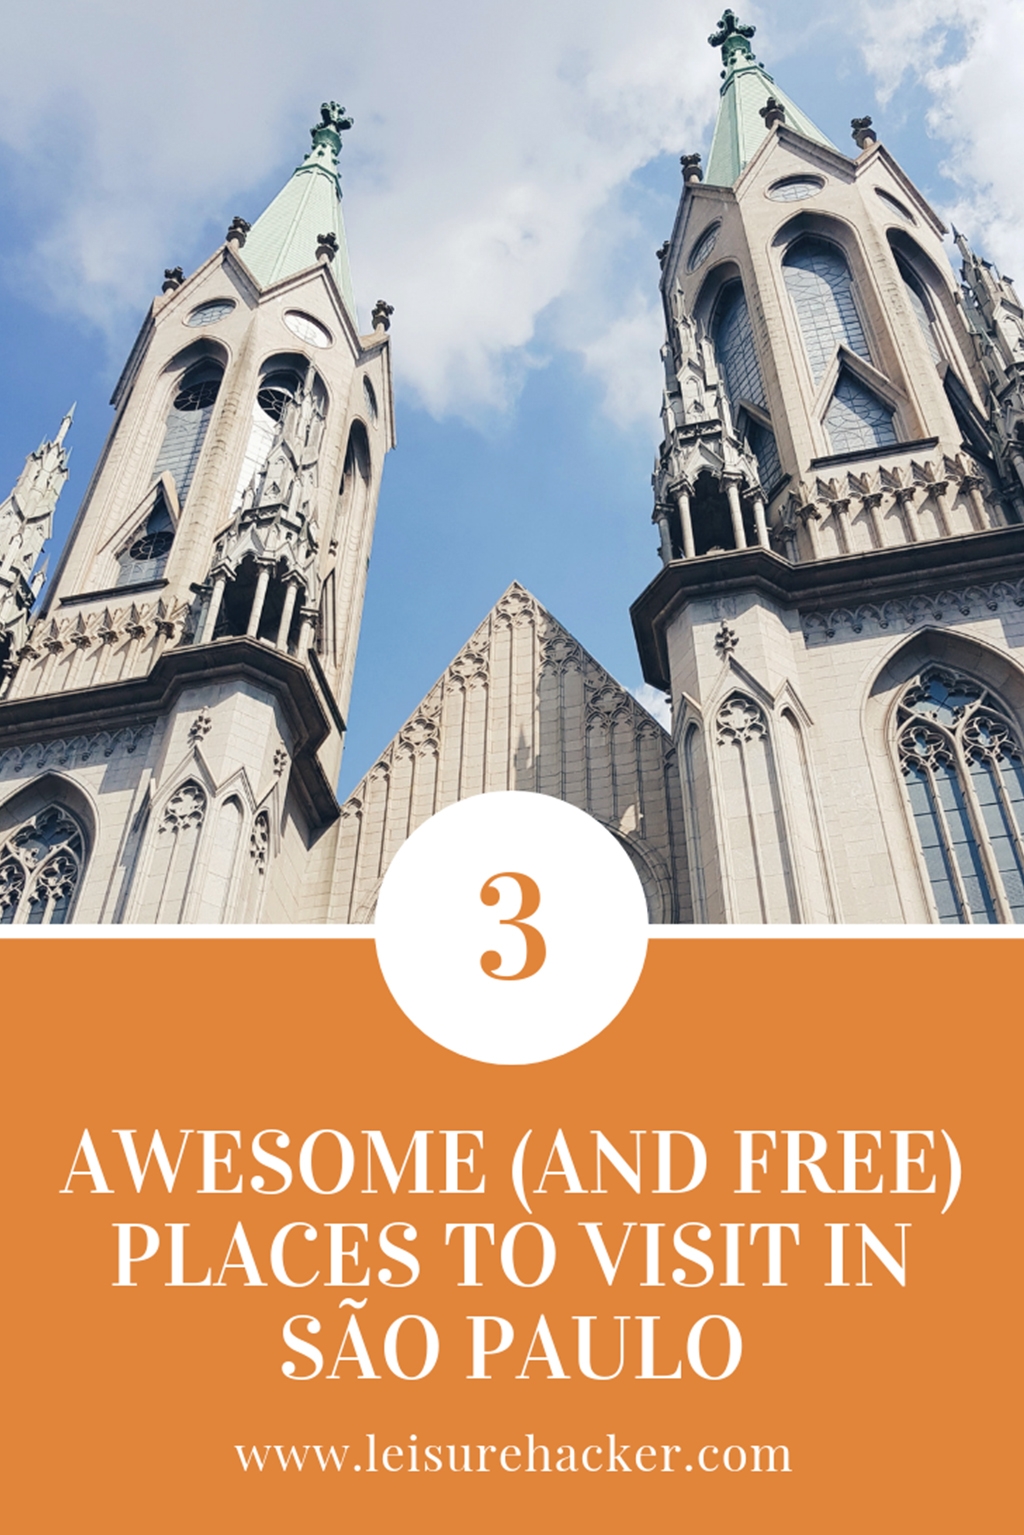 3 awesome (and free) places to visit in São Paulo